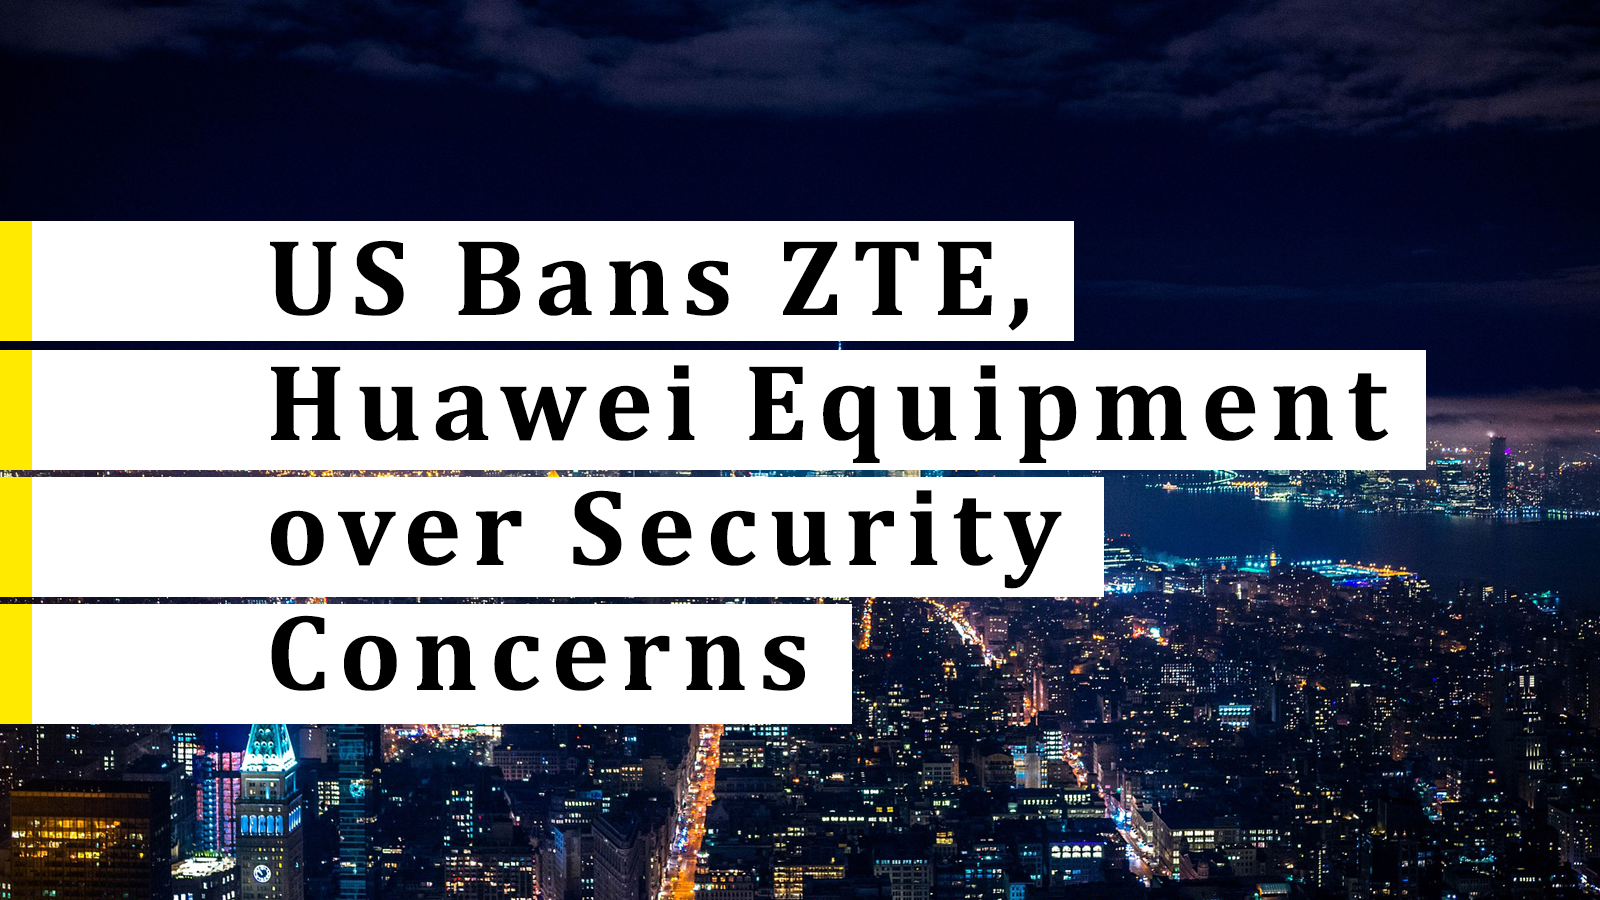 US Bans ZTE, Huawei Equipment over Security Concerns